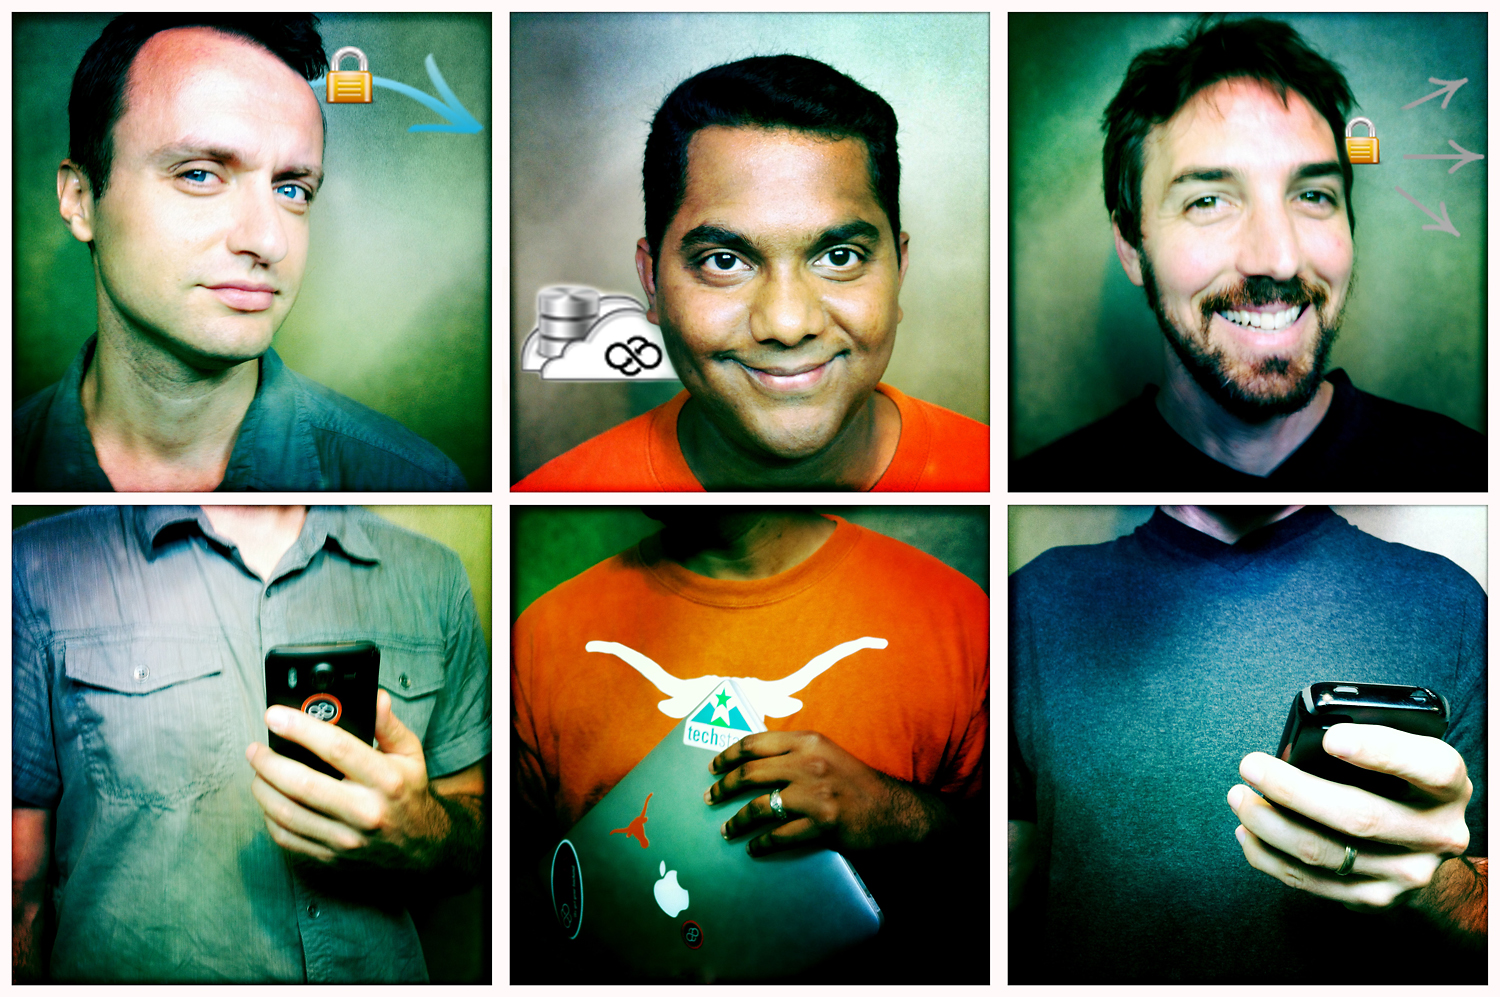   These folks do back-end support for mobile apps - so I photographed them using an iPhone  